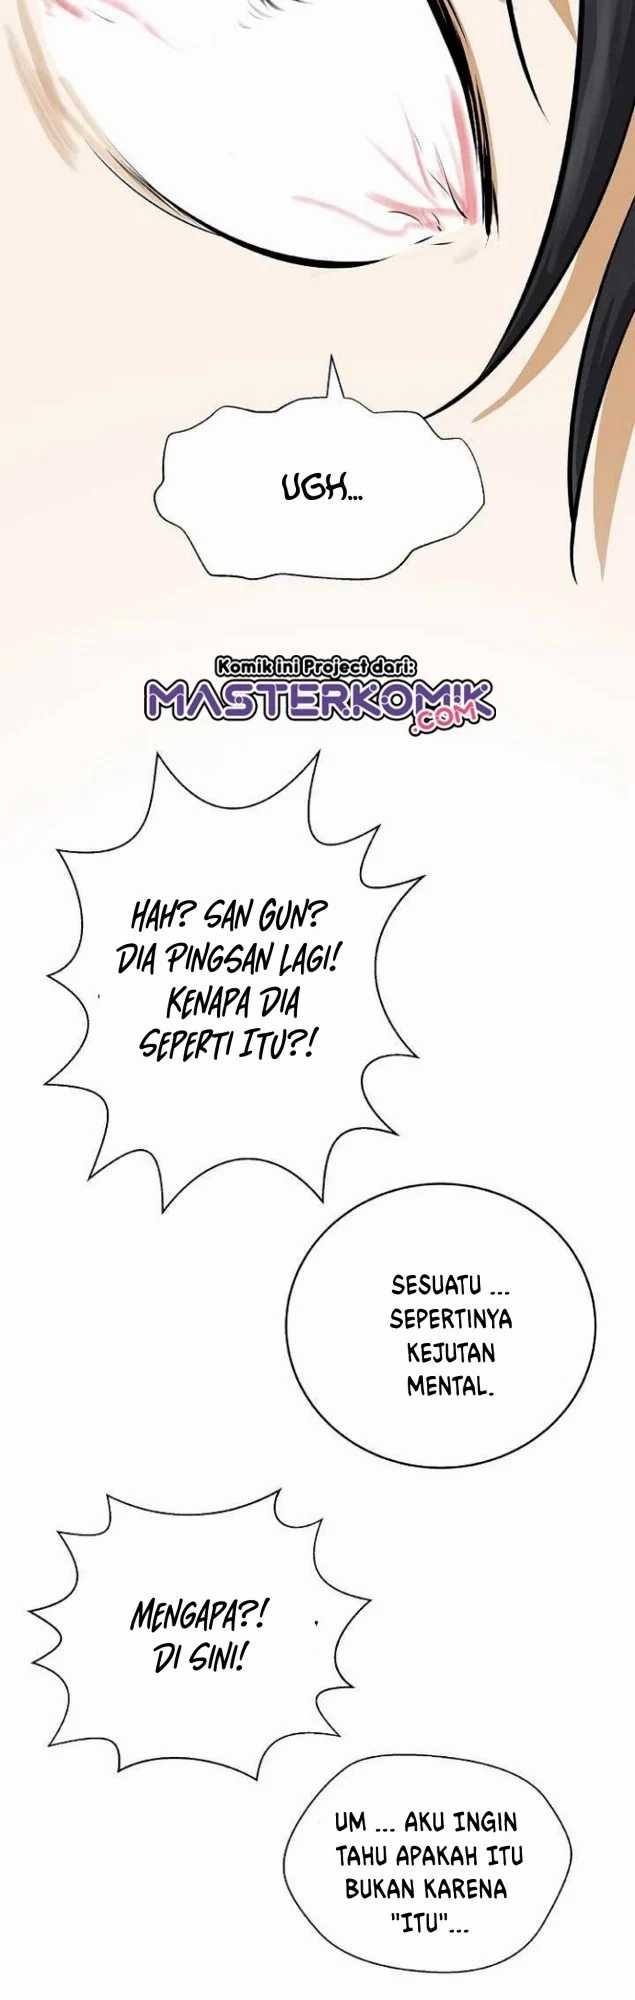 Cystic Story Chapter 45